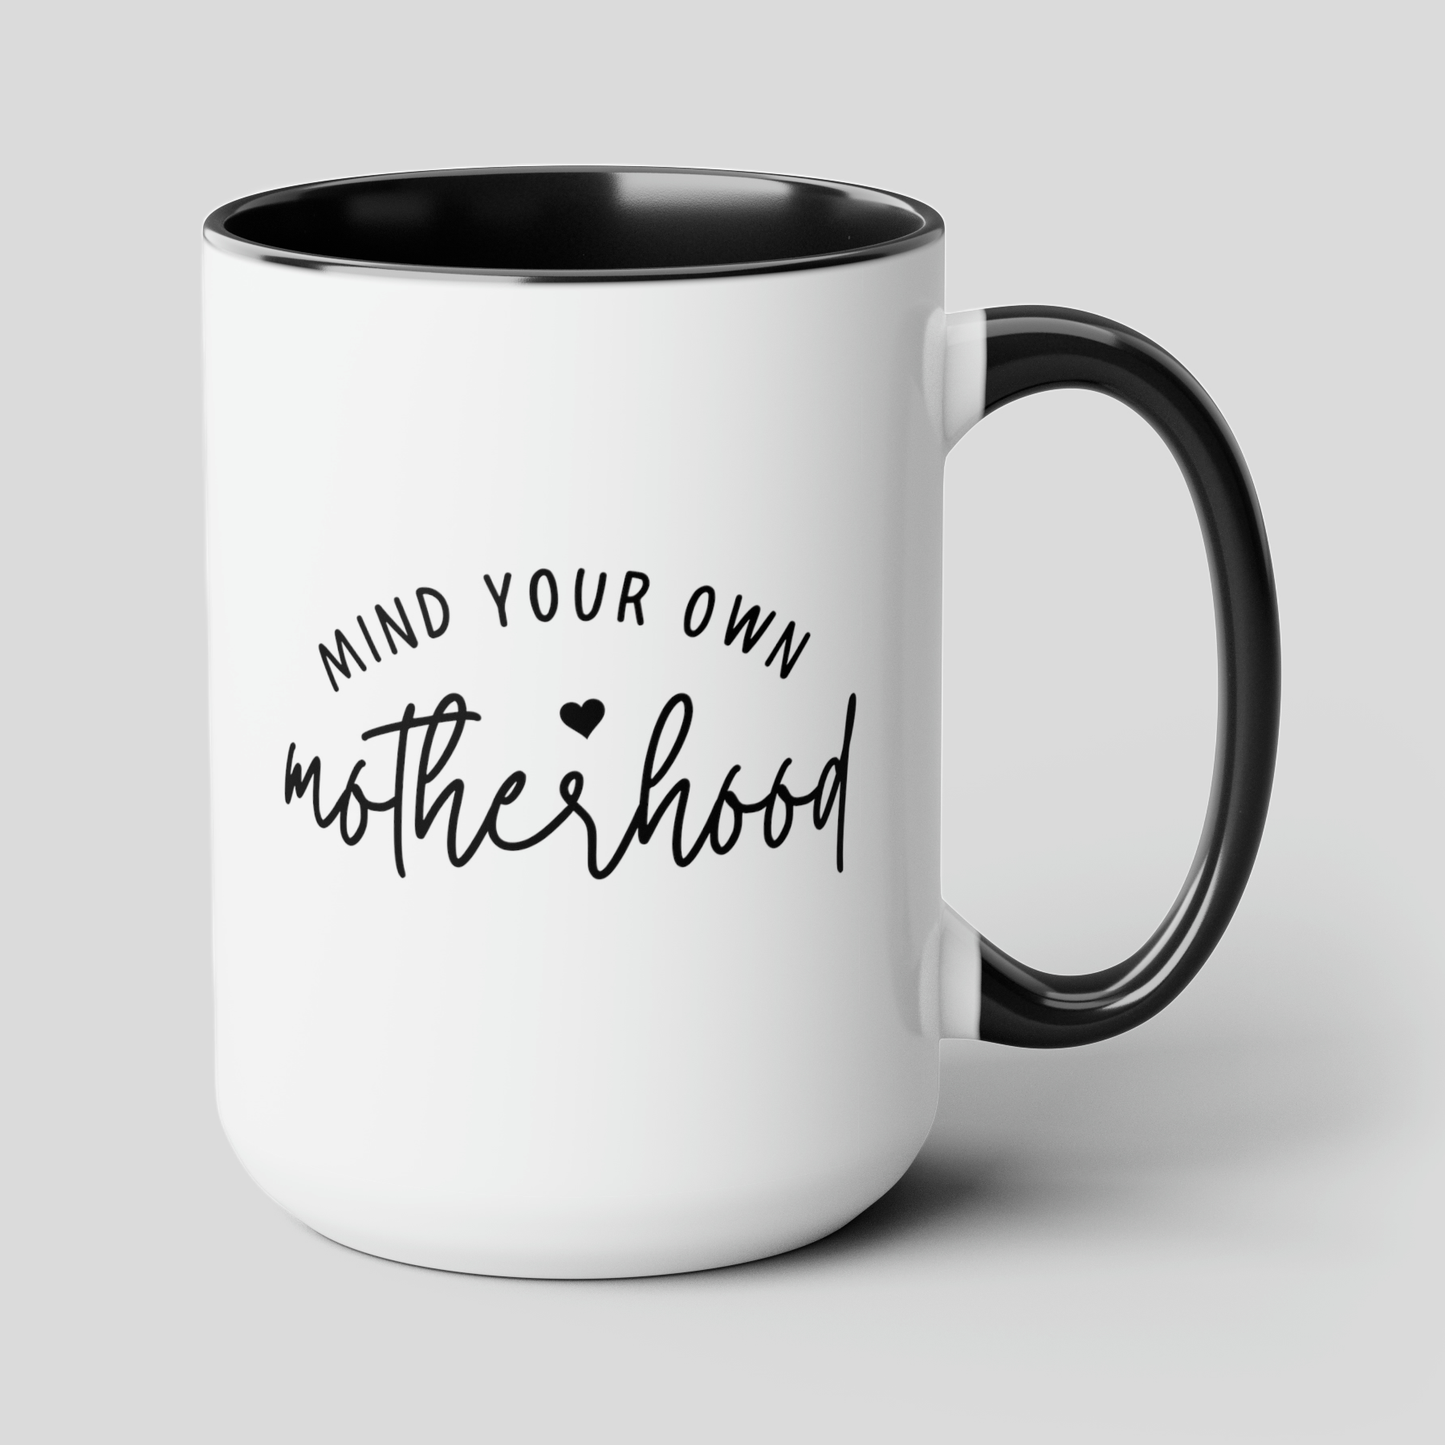 Mind Your Own Motherhood 15oz white with black accent funny large coffee mug gift for sassy new mom mother's day mama pregnancy announcement waveywares wavey wares wavywares wavy wares cover